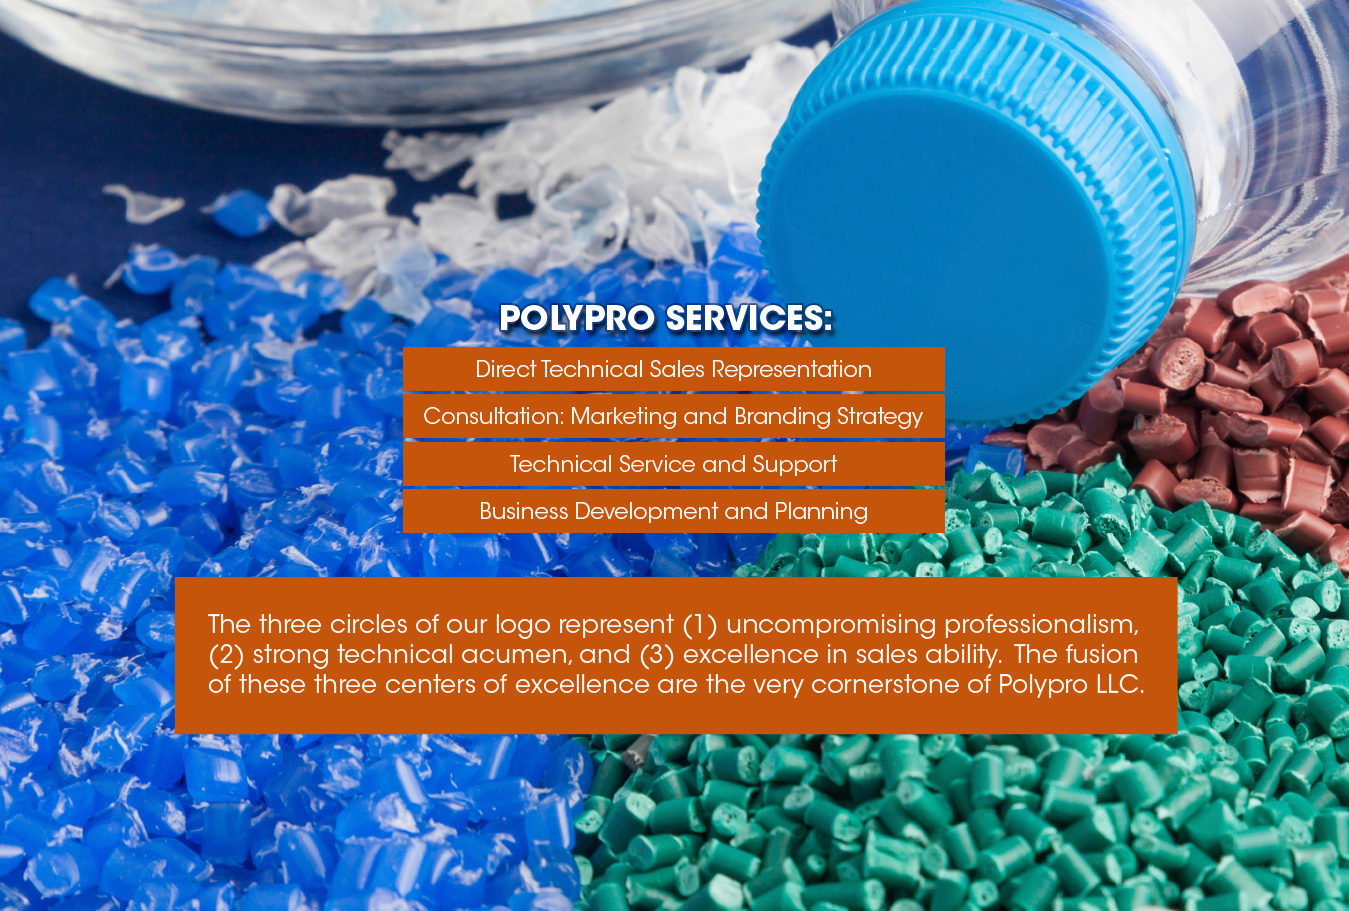 Recycled plastic polymers